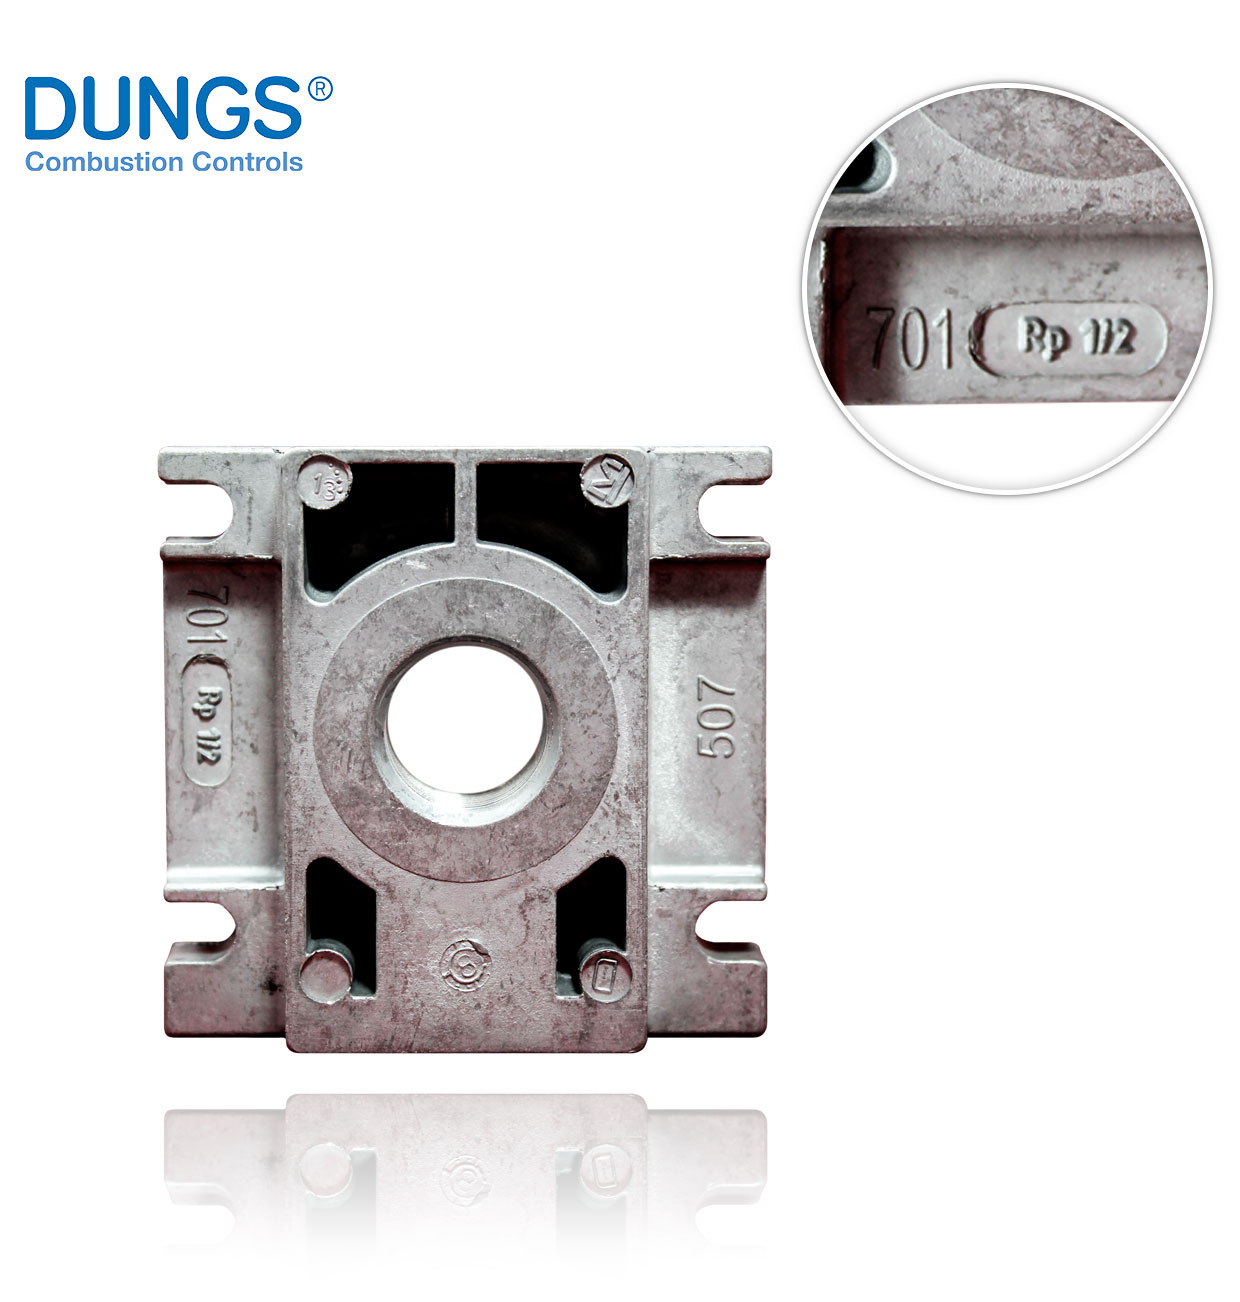 DUNGS FLANGE with R1/2" PLUG FOR DMV 507/11